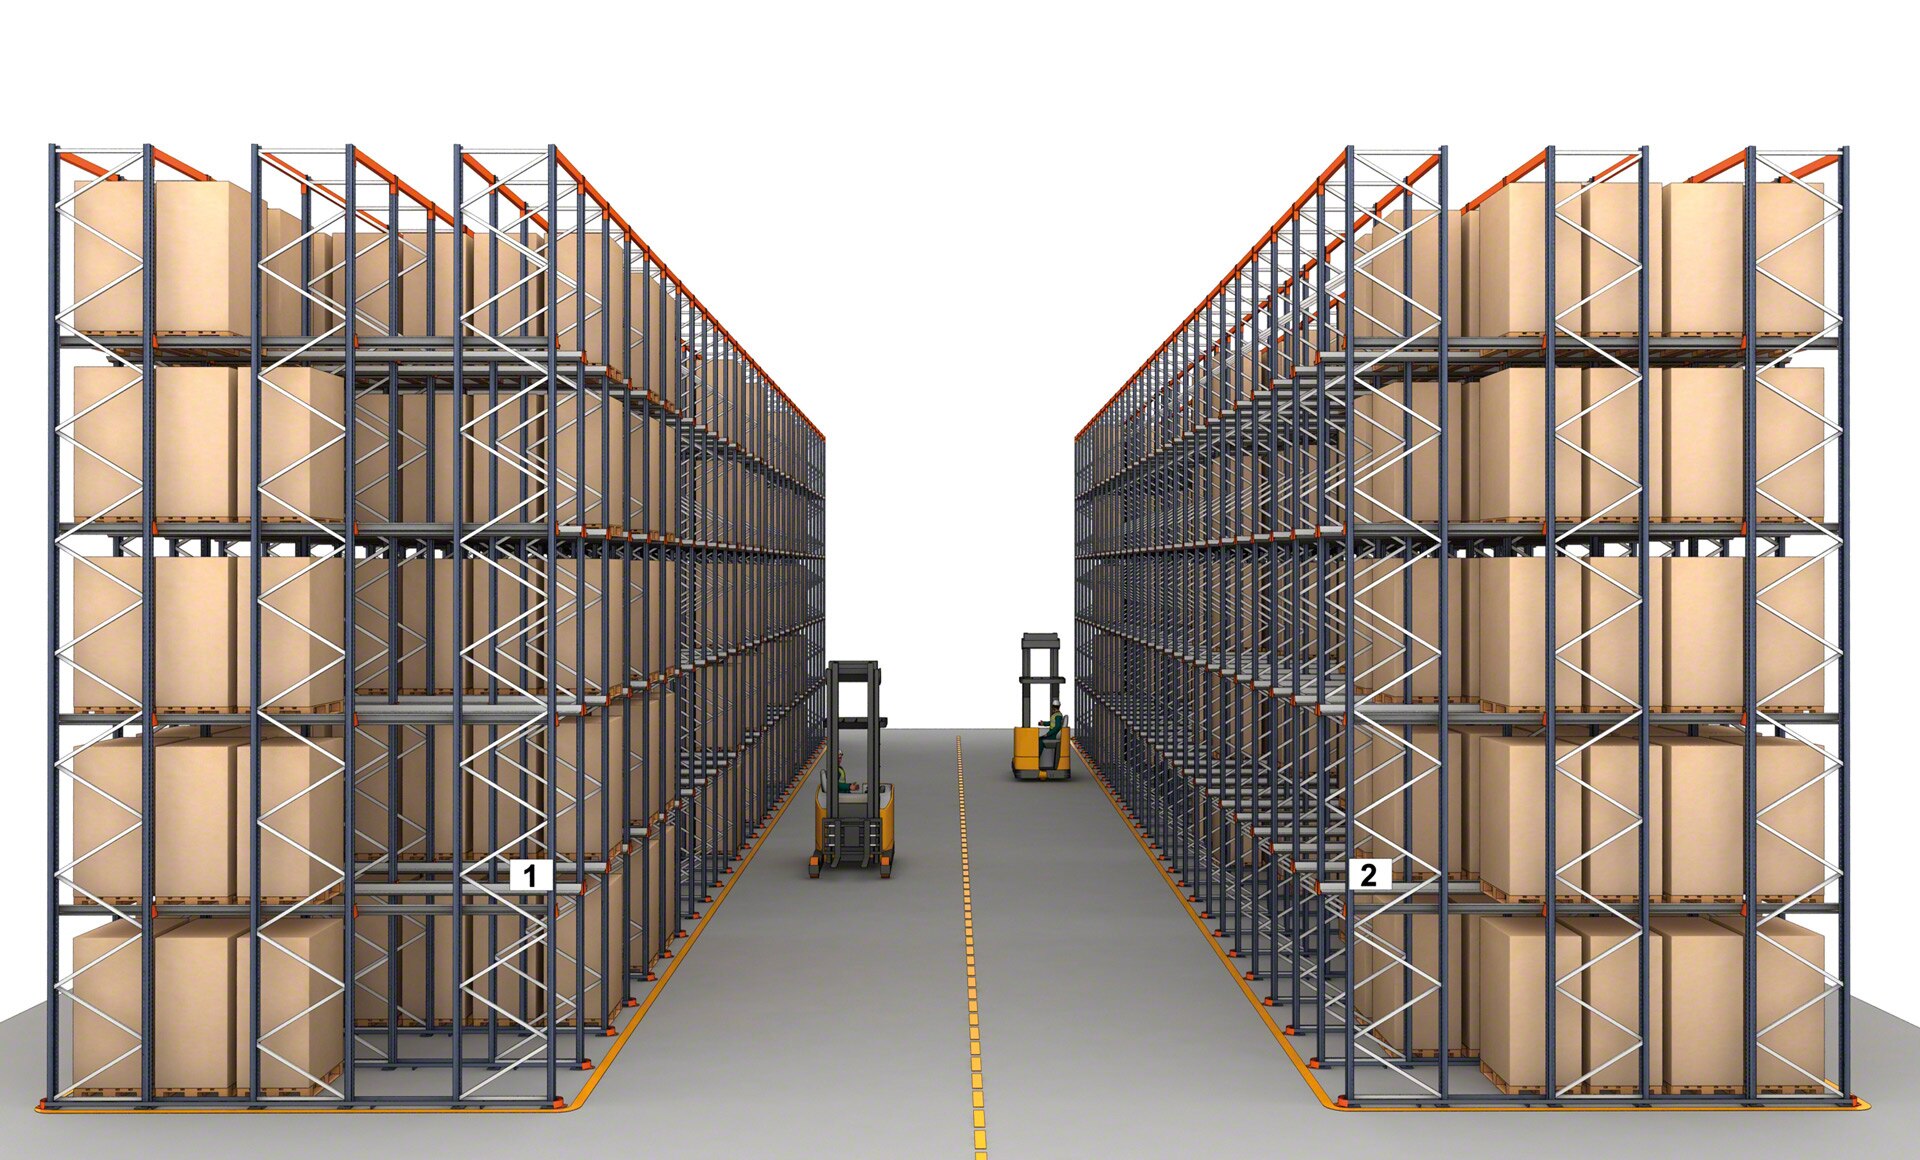 High-density racking systems significantly increase warehouse capacity